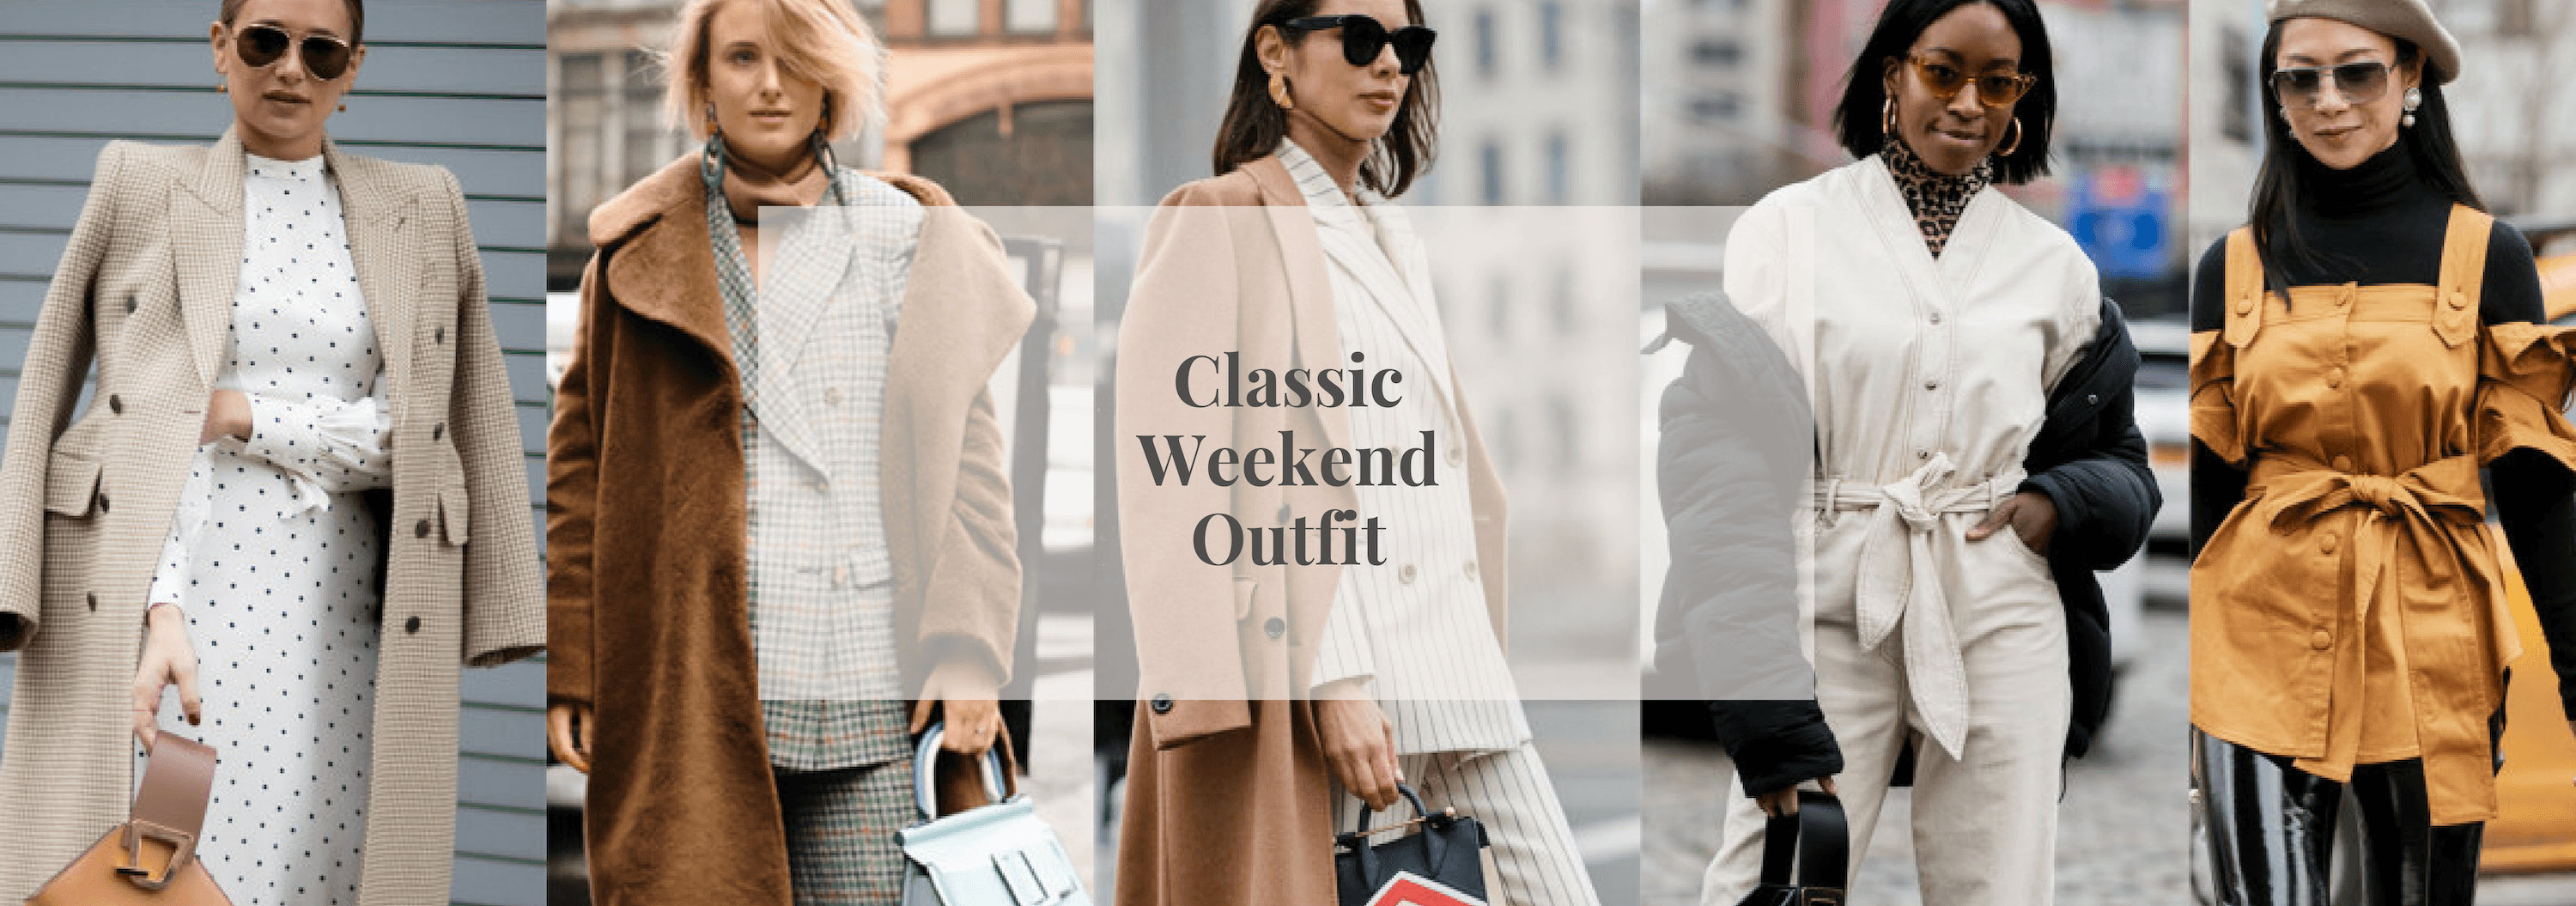 Classic Weekend Outfit - Numi